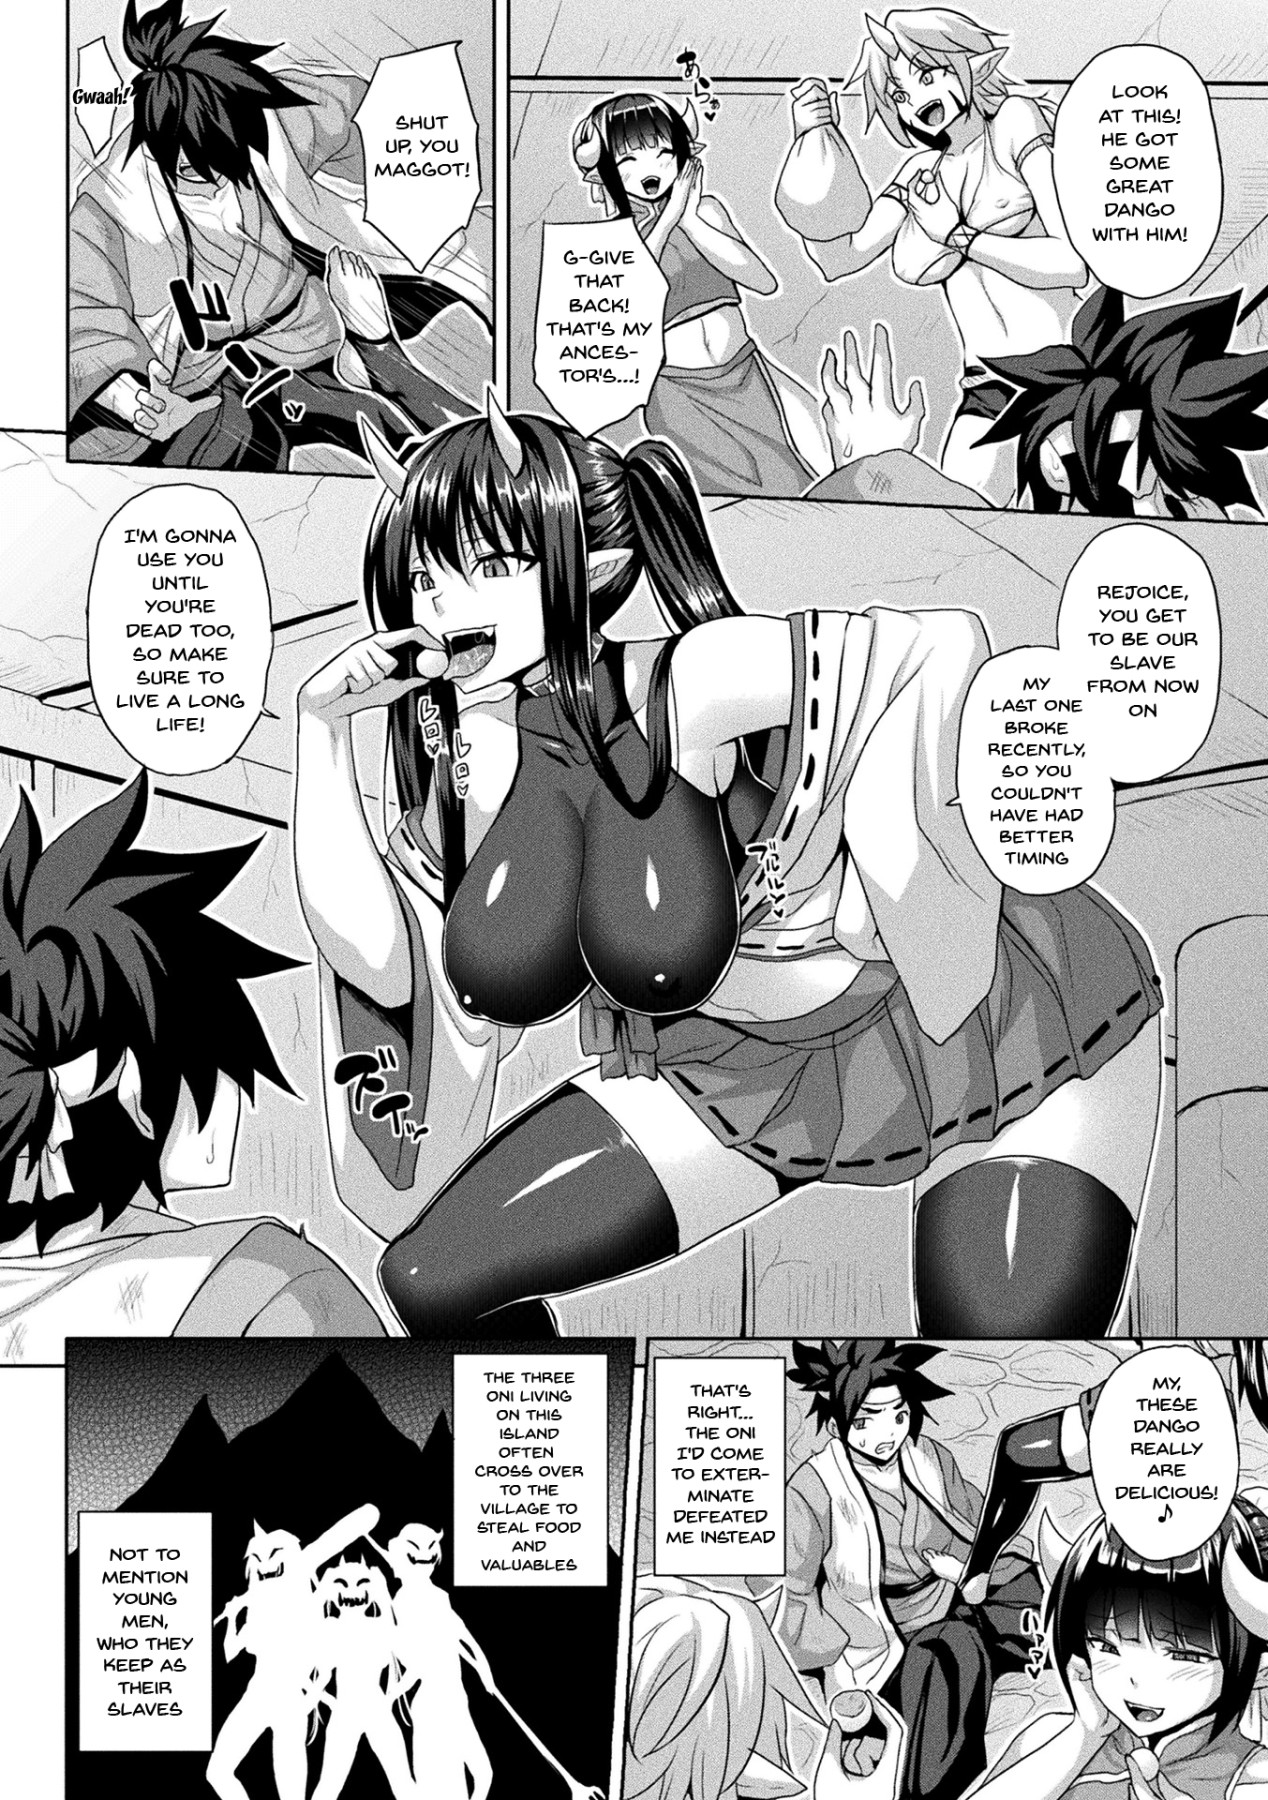 Hentai Manga Comic-The Woman Who's Fallen Into Being a Slut In Defeat-Chapter 4-2